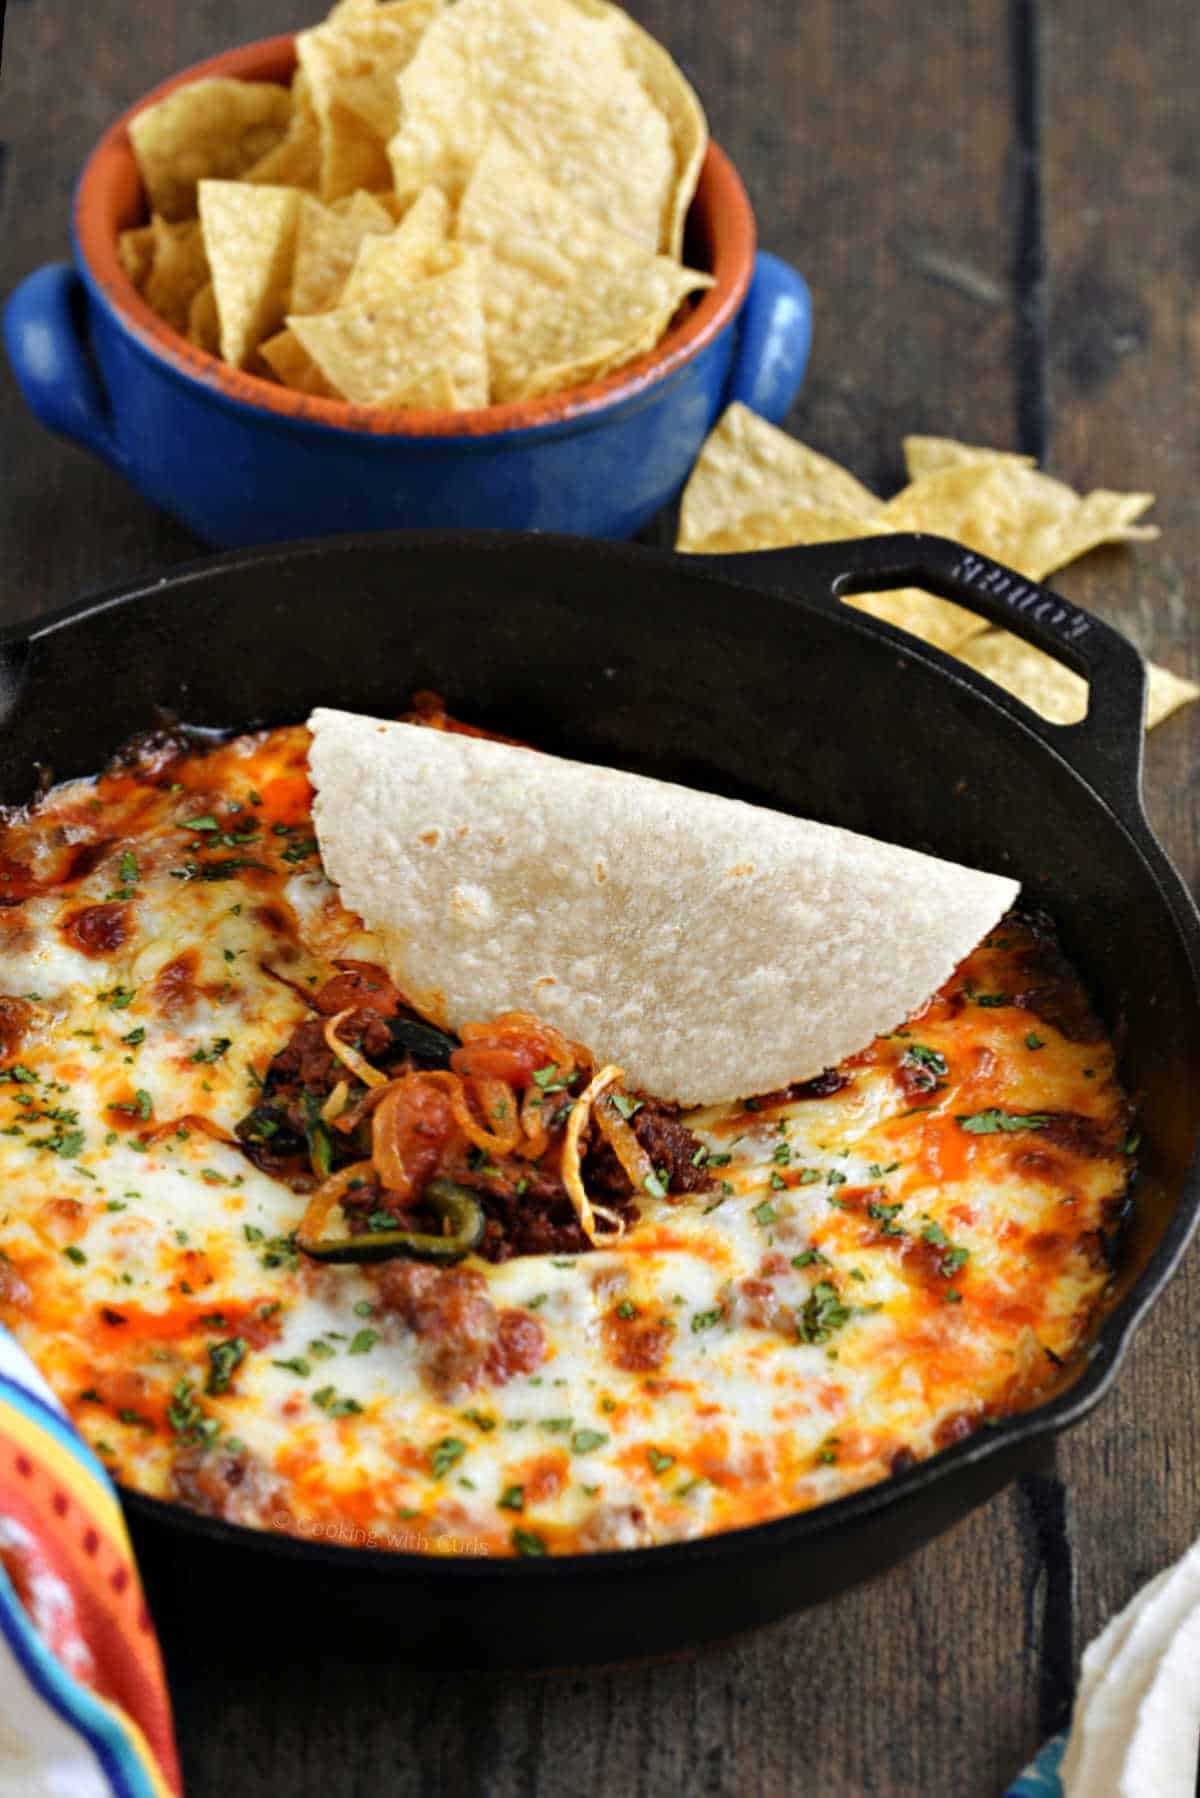 Queso fundido in skillet with small tortilla scooping up the dip.